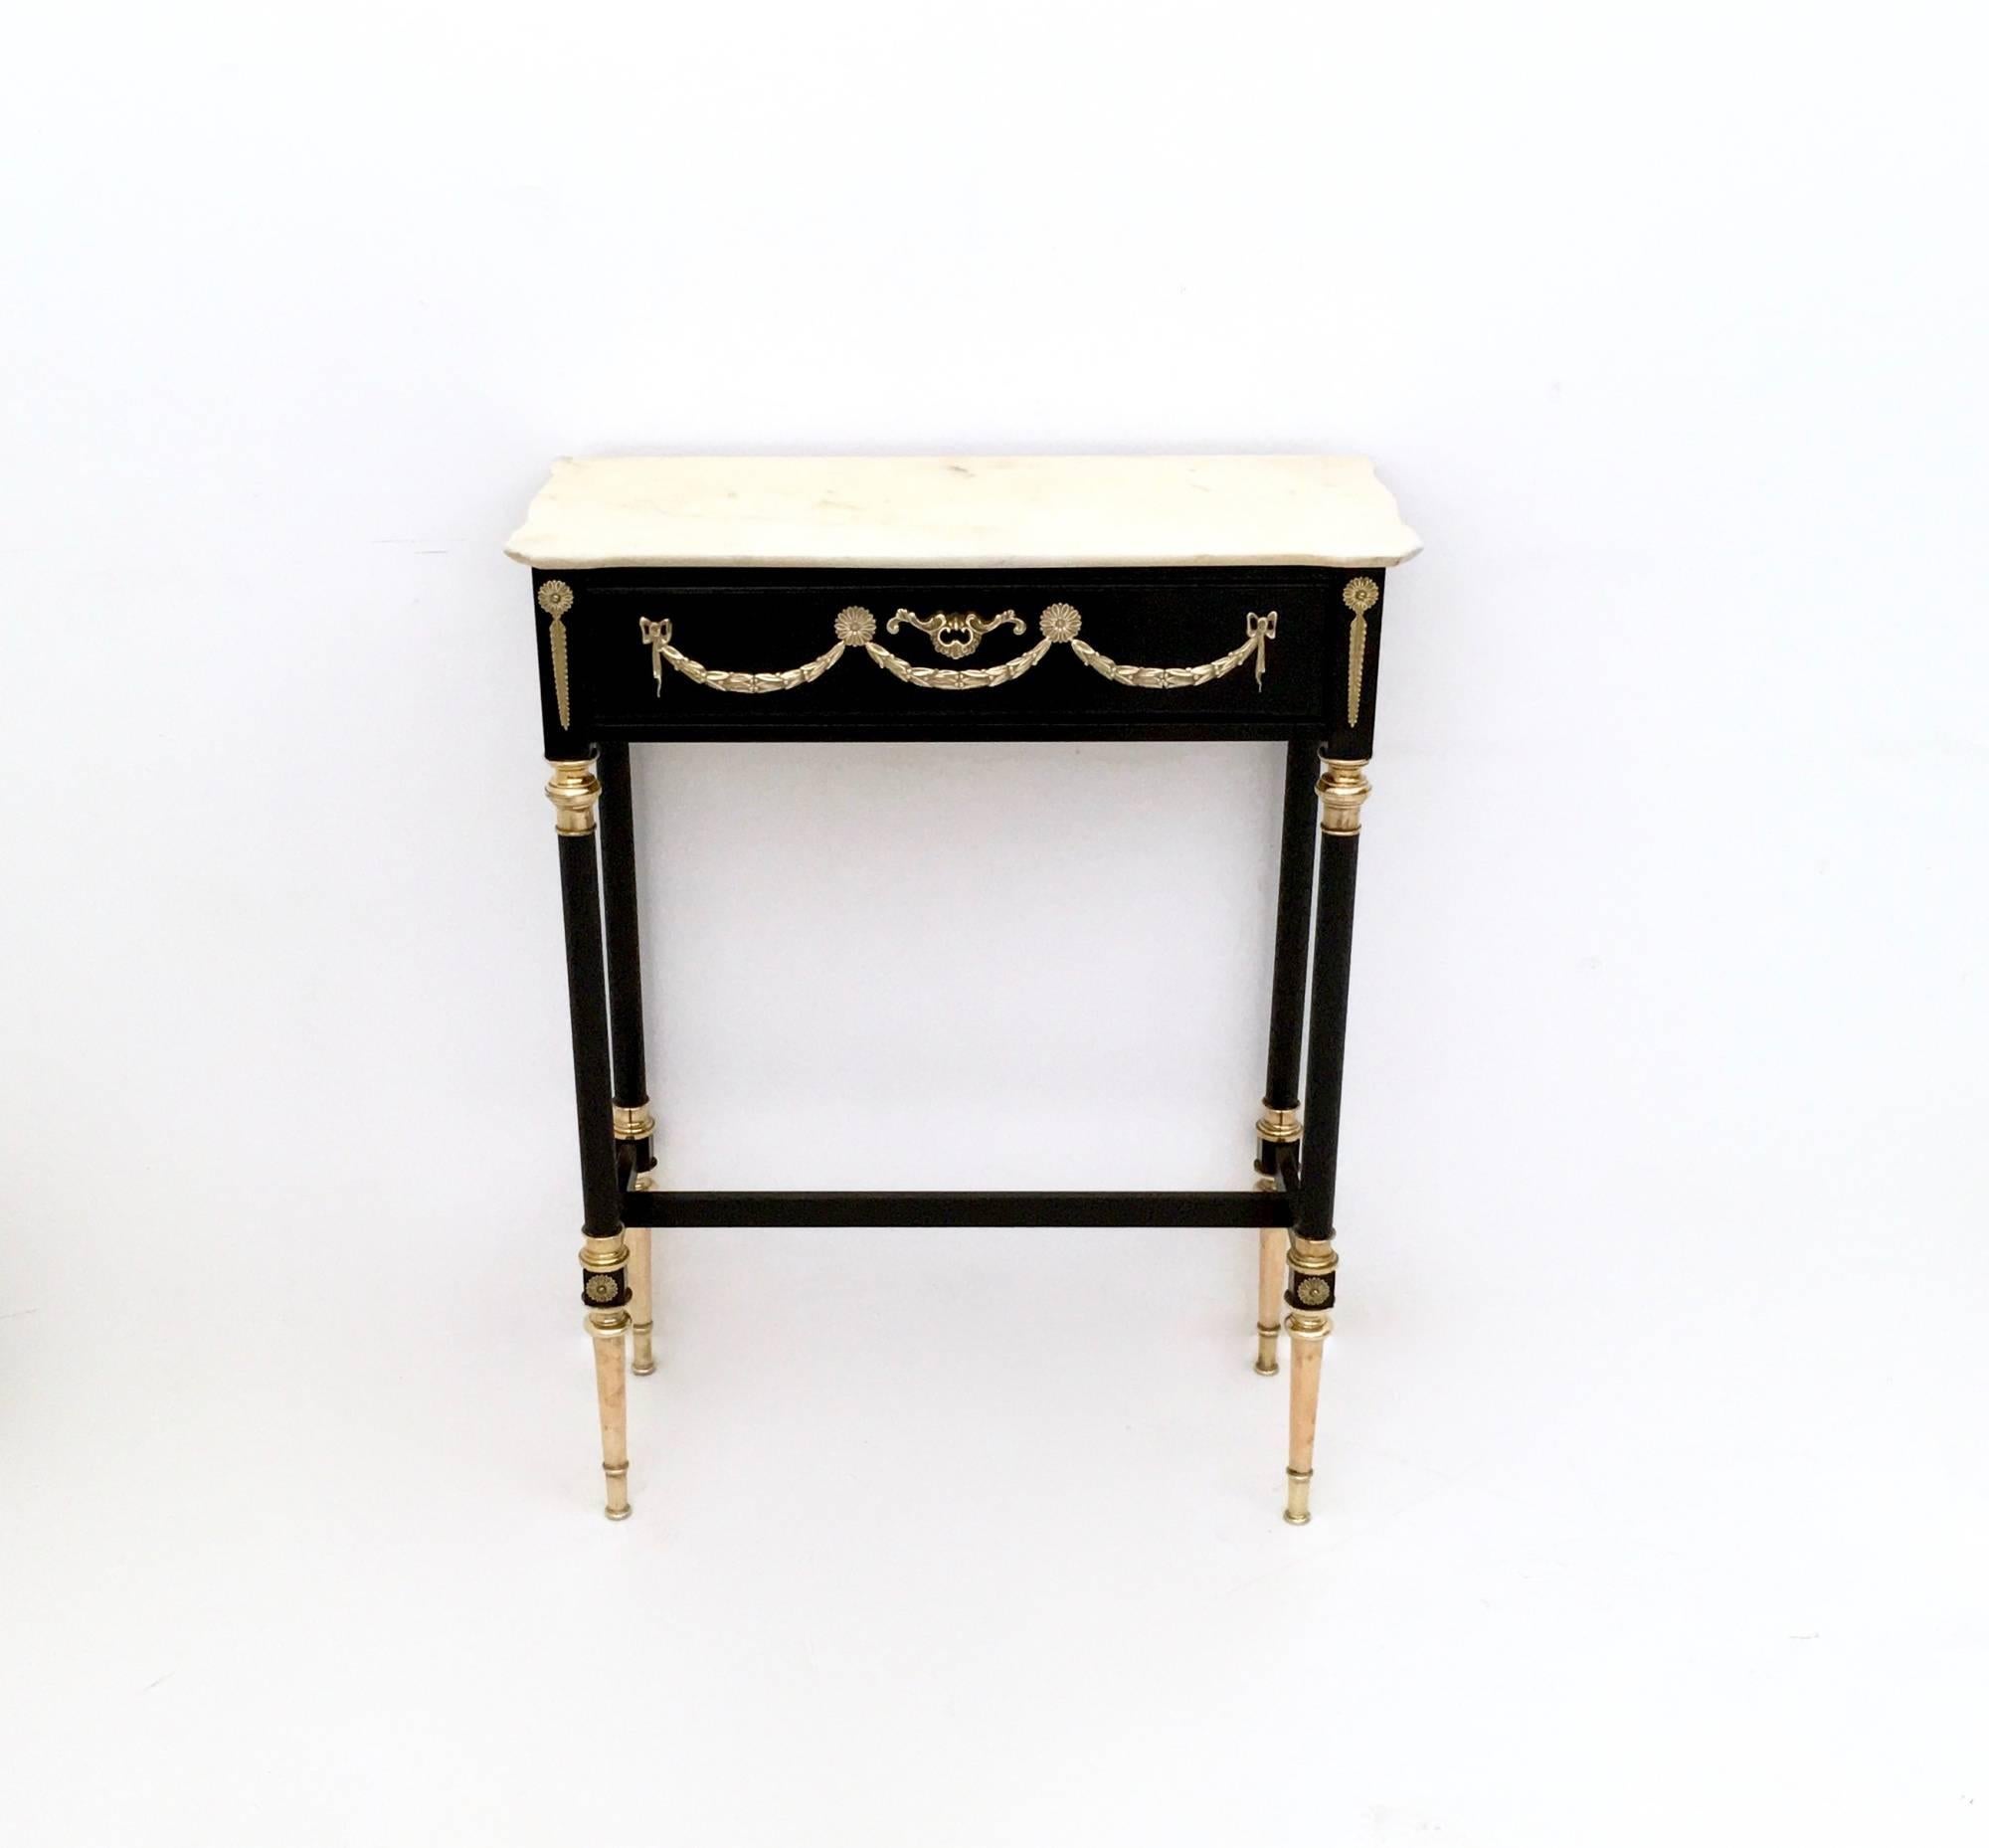 Varnished Lacquered Wood Console Table with Carrara Marble Top in Luigi XVI Style, 1950s